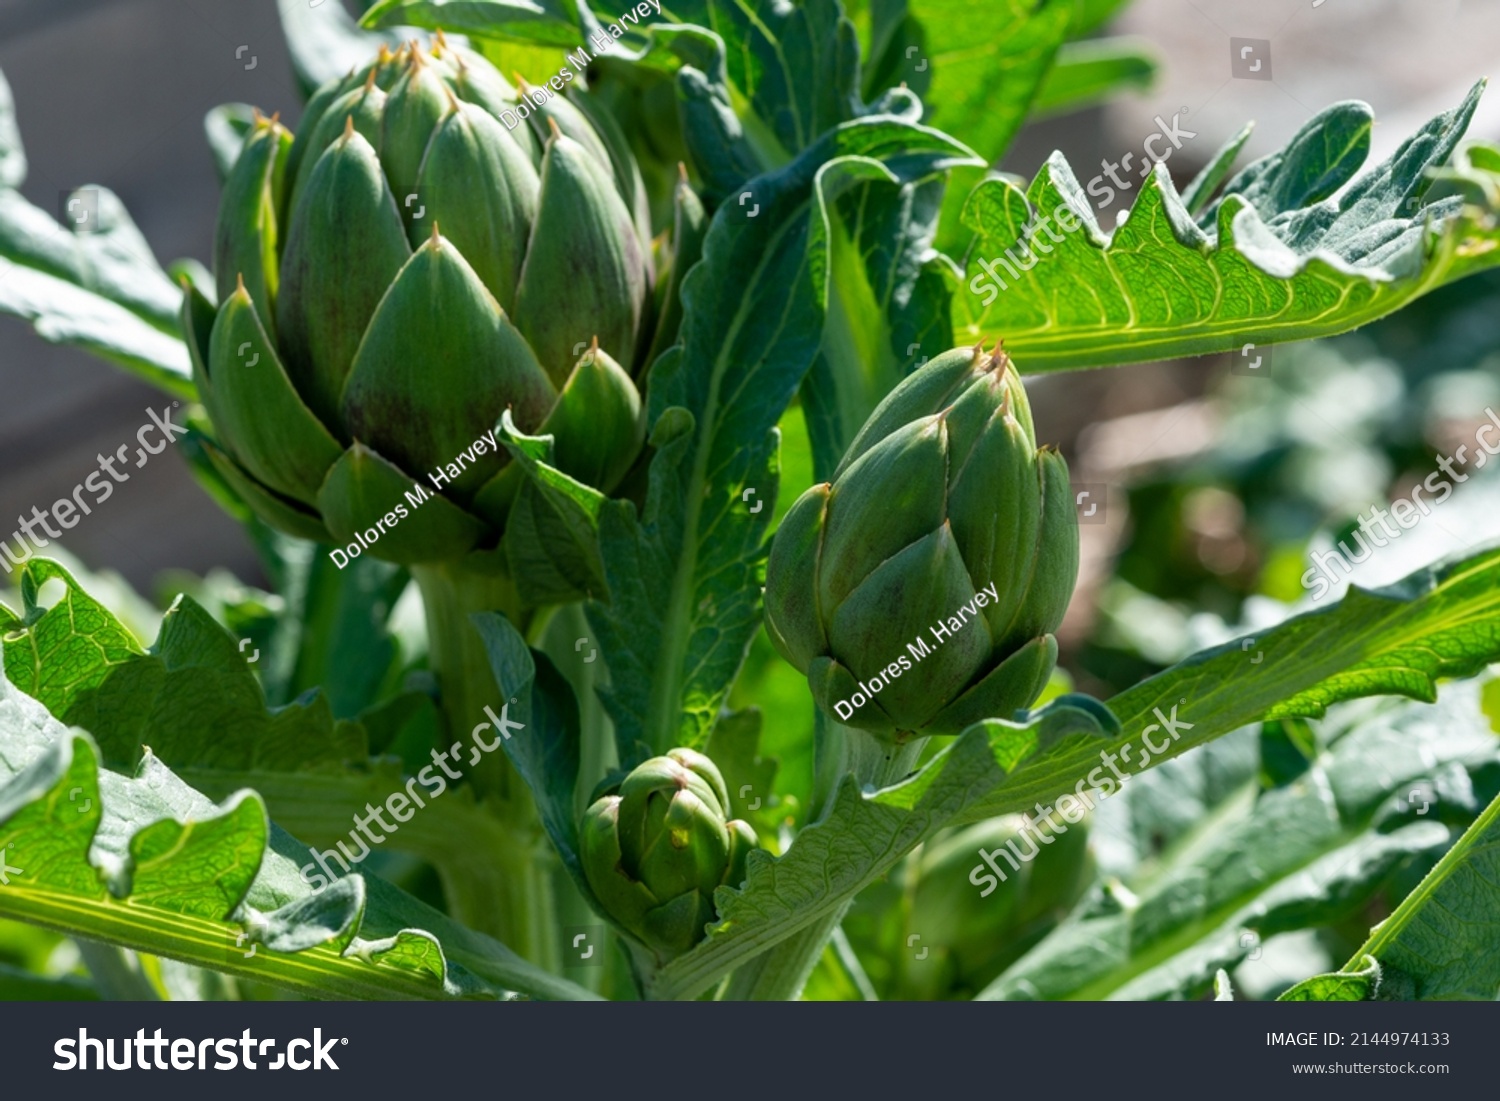 Closeup of multiple lush vibrant green waxy organic artichoke heads on leafy plant stems. The thick pointy leaves of the raw artichoke vegetables have a thistle at the tip with little brown spikes.  #2144974133